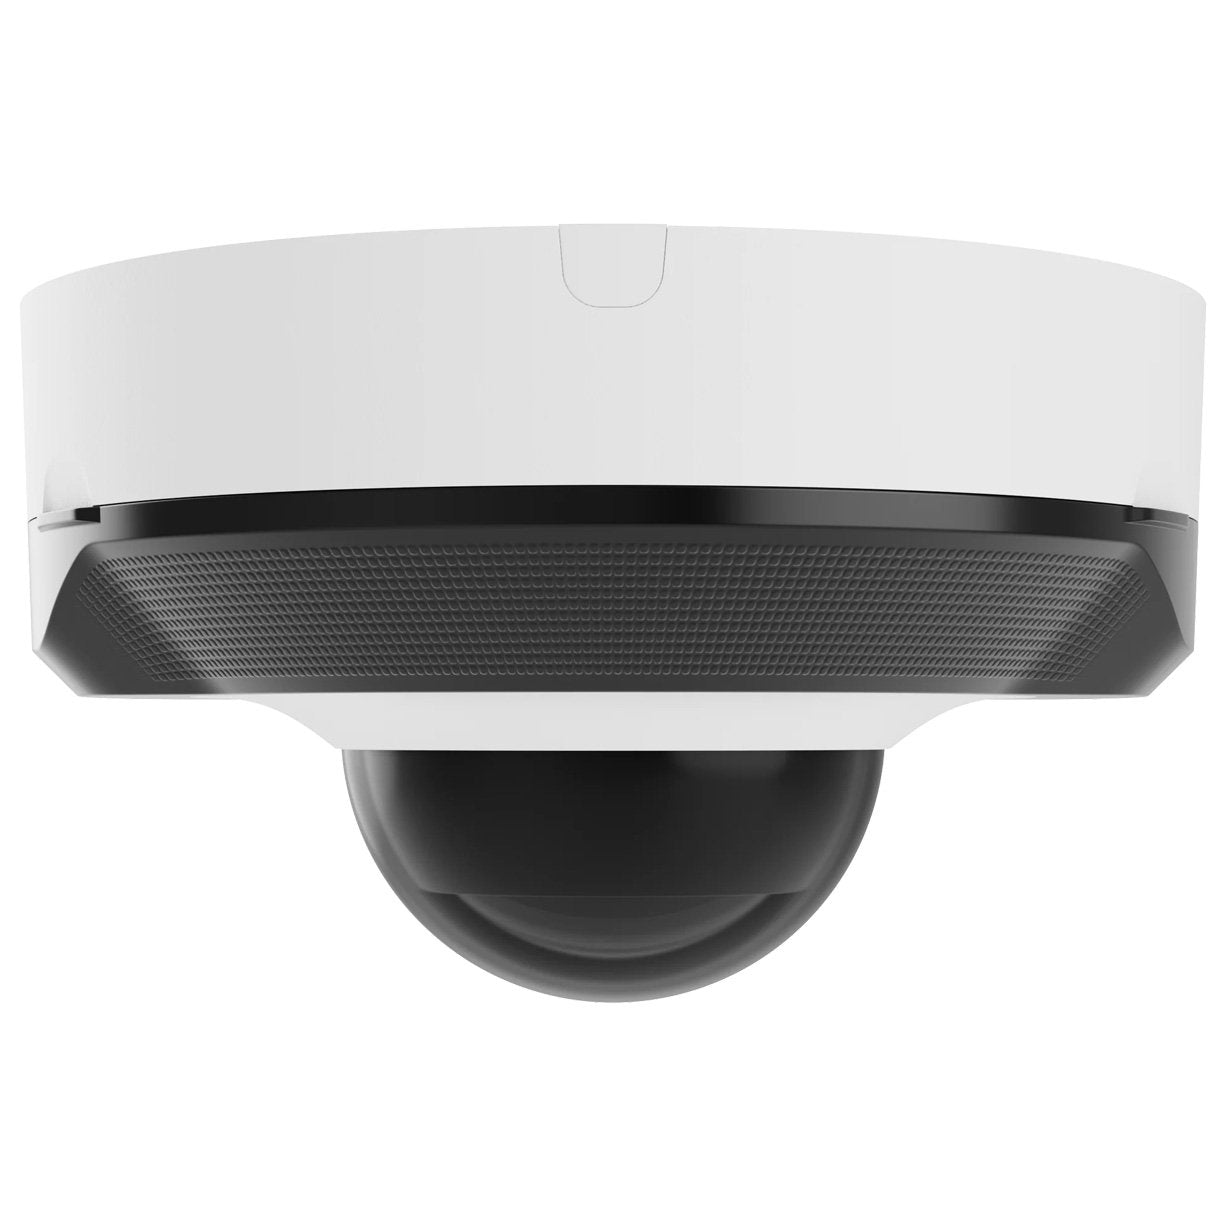 Ajax 8MP IP Baseline AI Series IR Dome Camera, AI-Powered Object Recognition, 2.8mm, 120dB WDR, 15m IR, POE / 12VDC, IP65, MicroSD, Built-in Mic